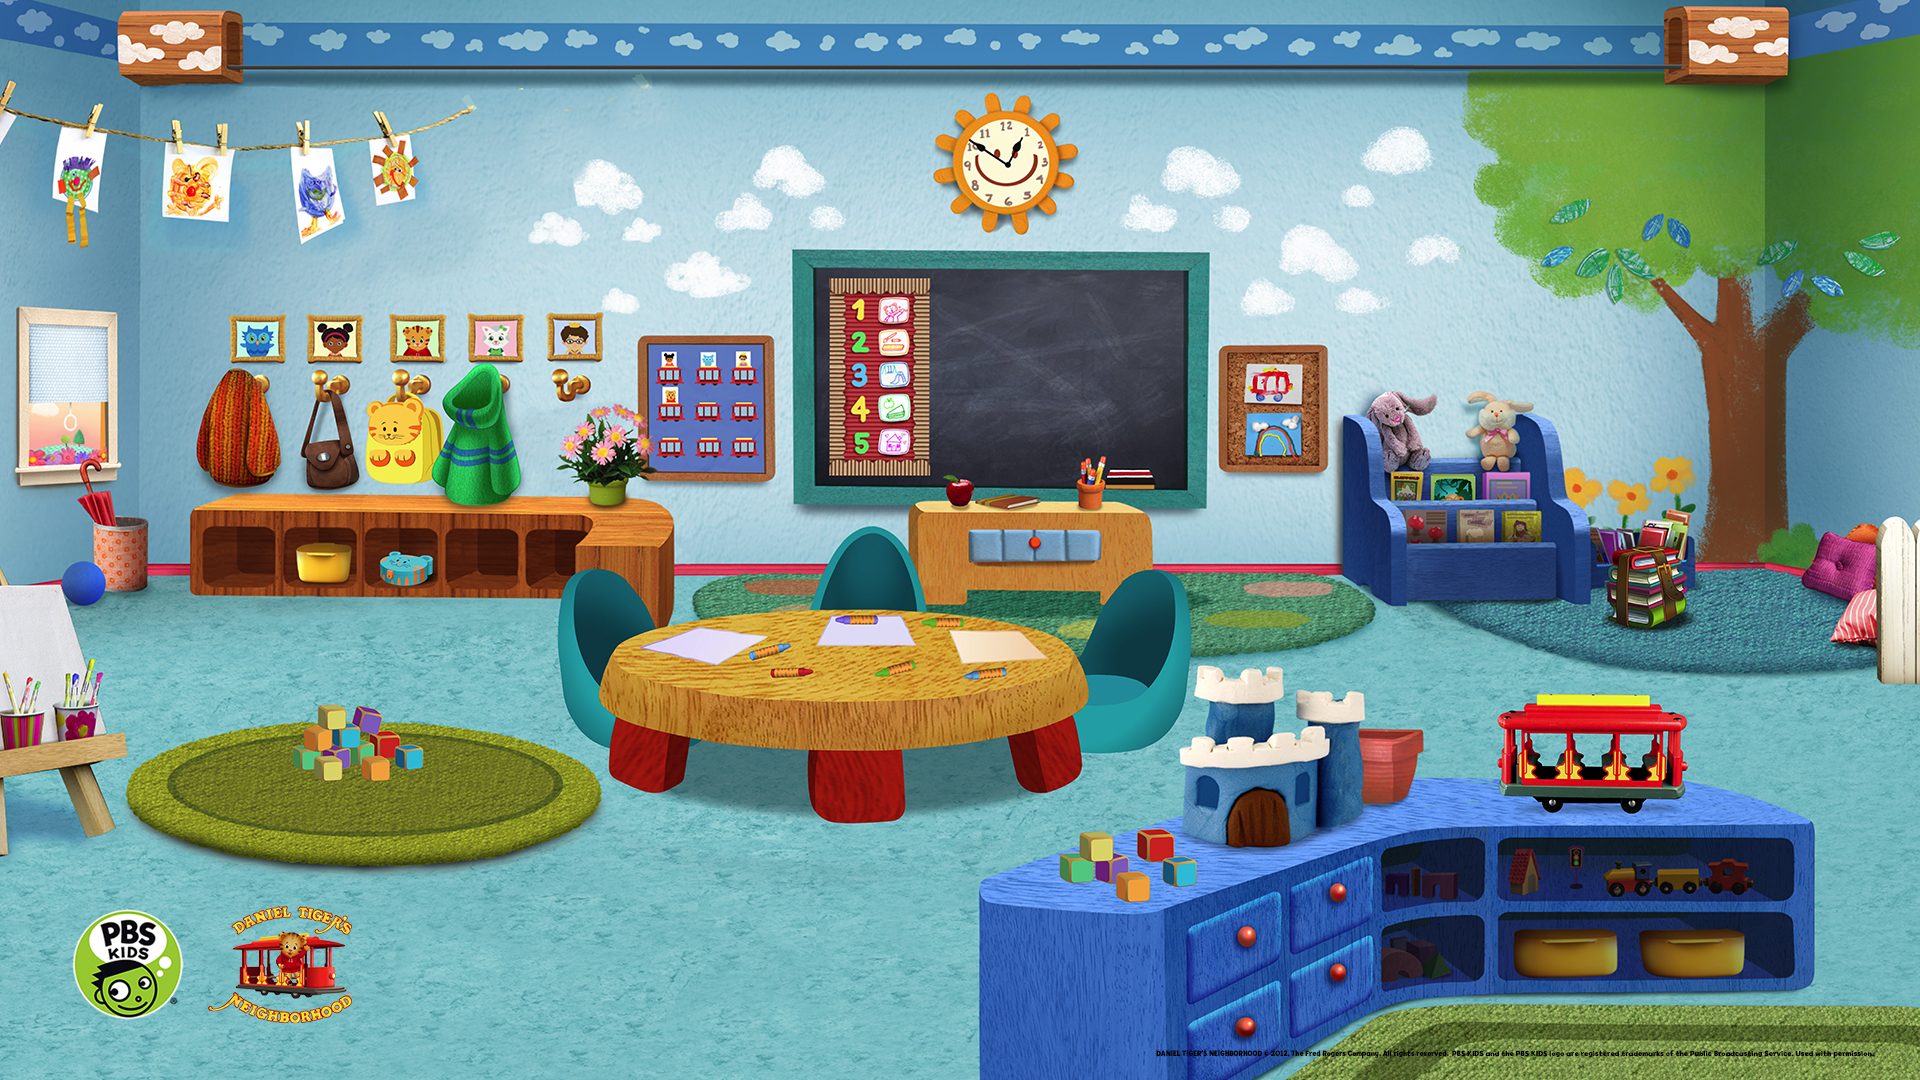 Pbs Kids Background For Your Next Video Chat Parents